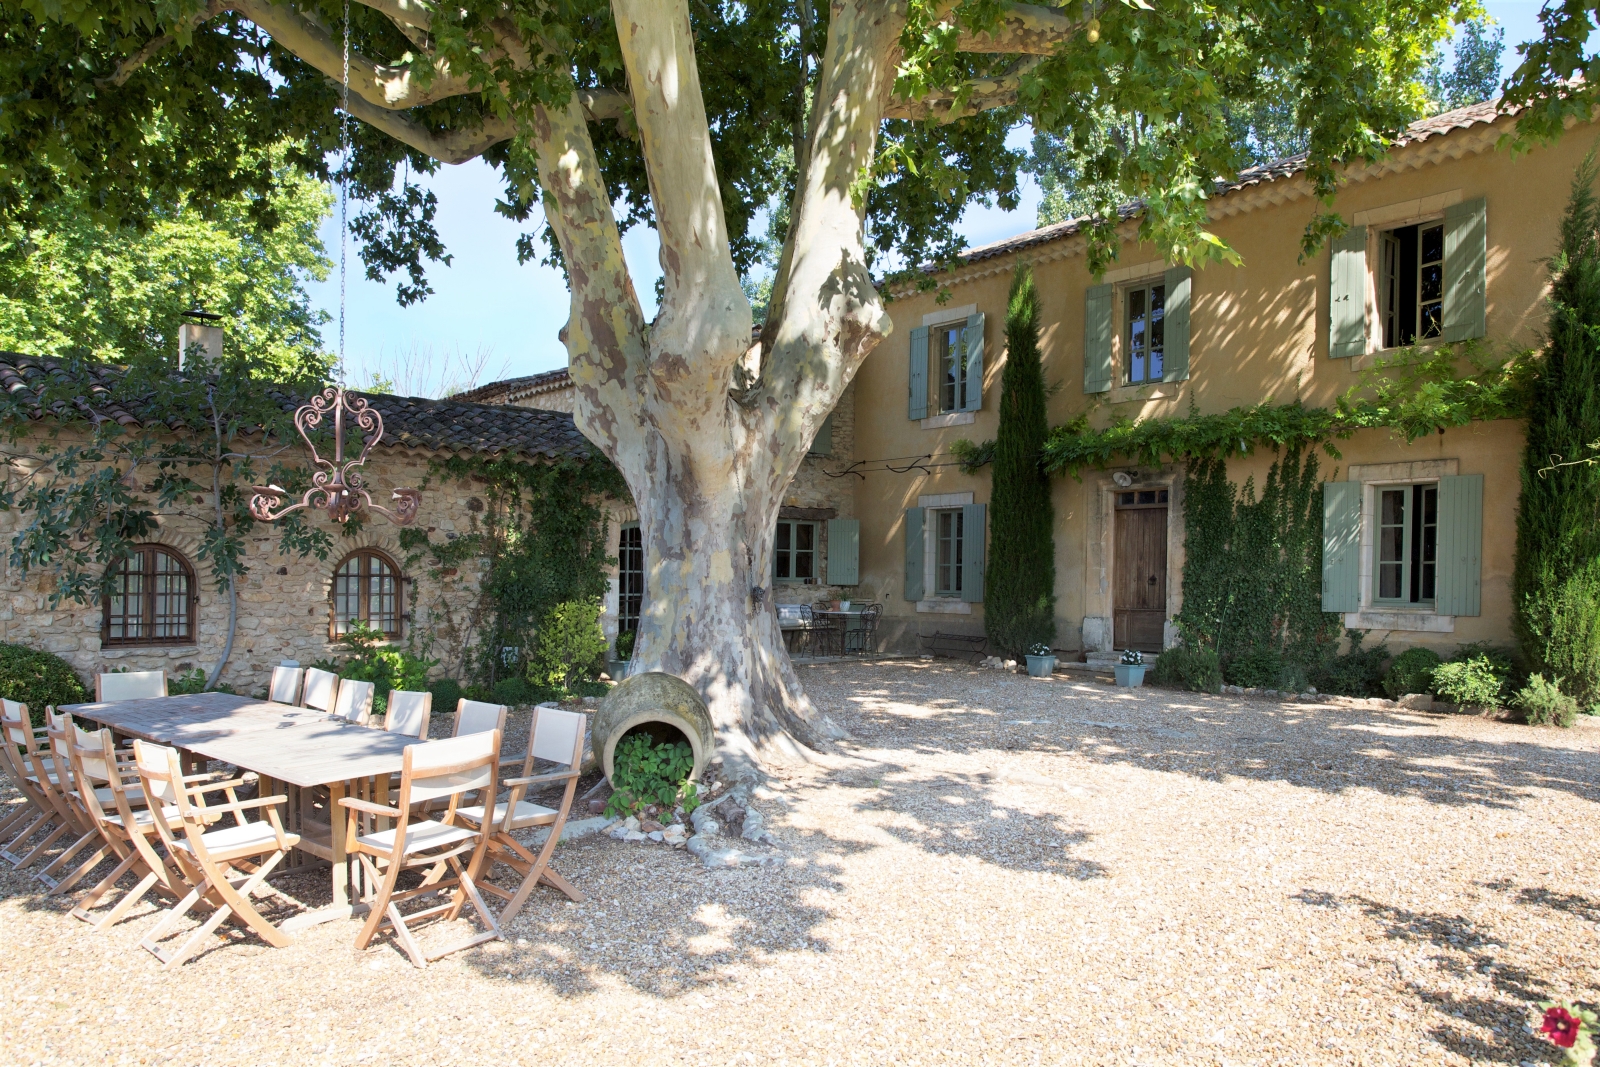 Terrace with long table, chairs and tree at Le Pont Romain in Provence, France